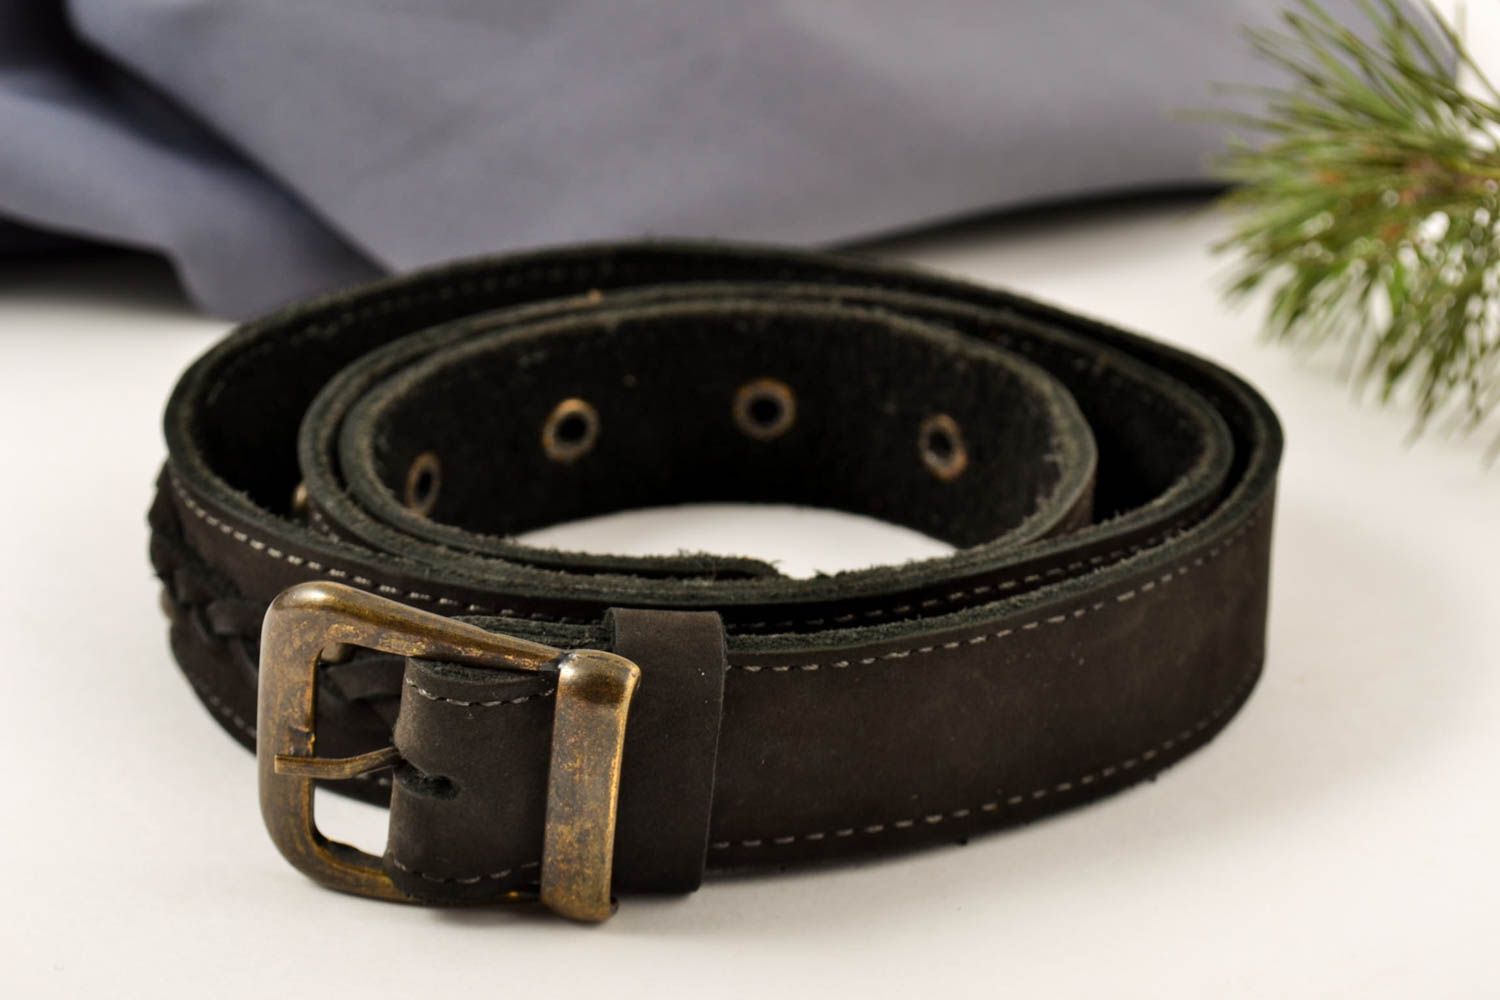 Handmade leather belt mens belt men accessories best gifts for him leather goods photo 1